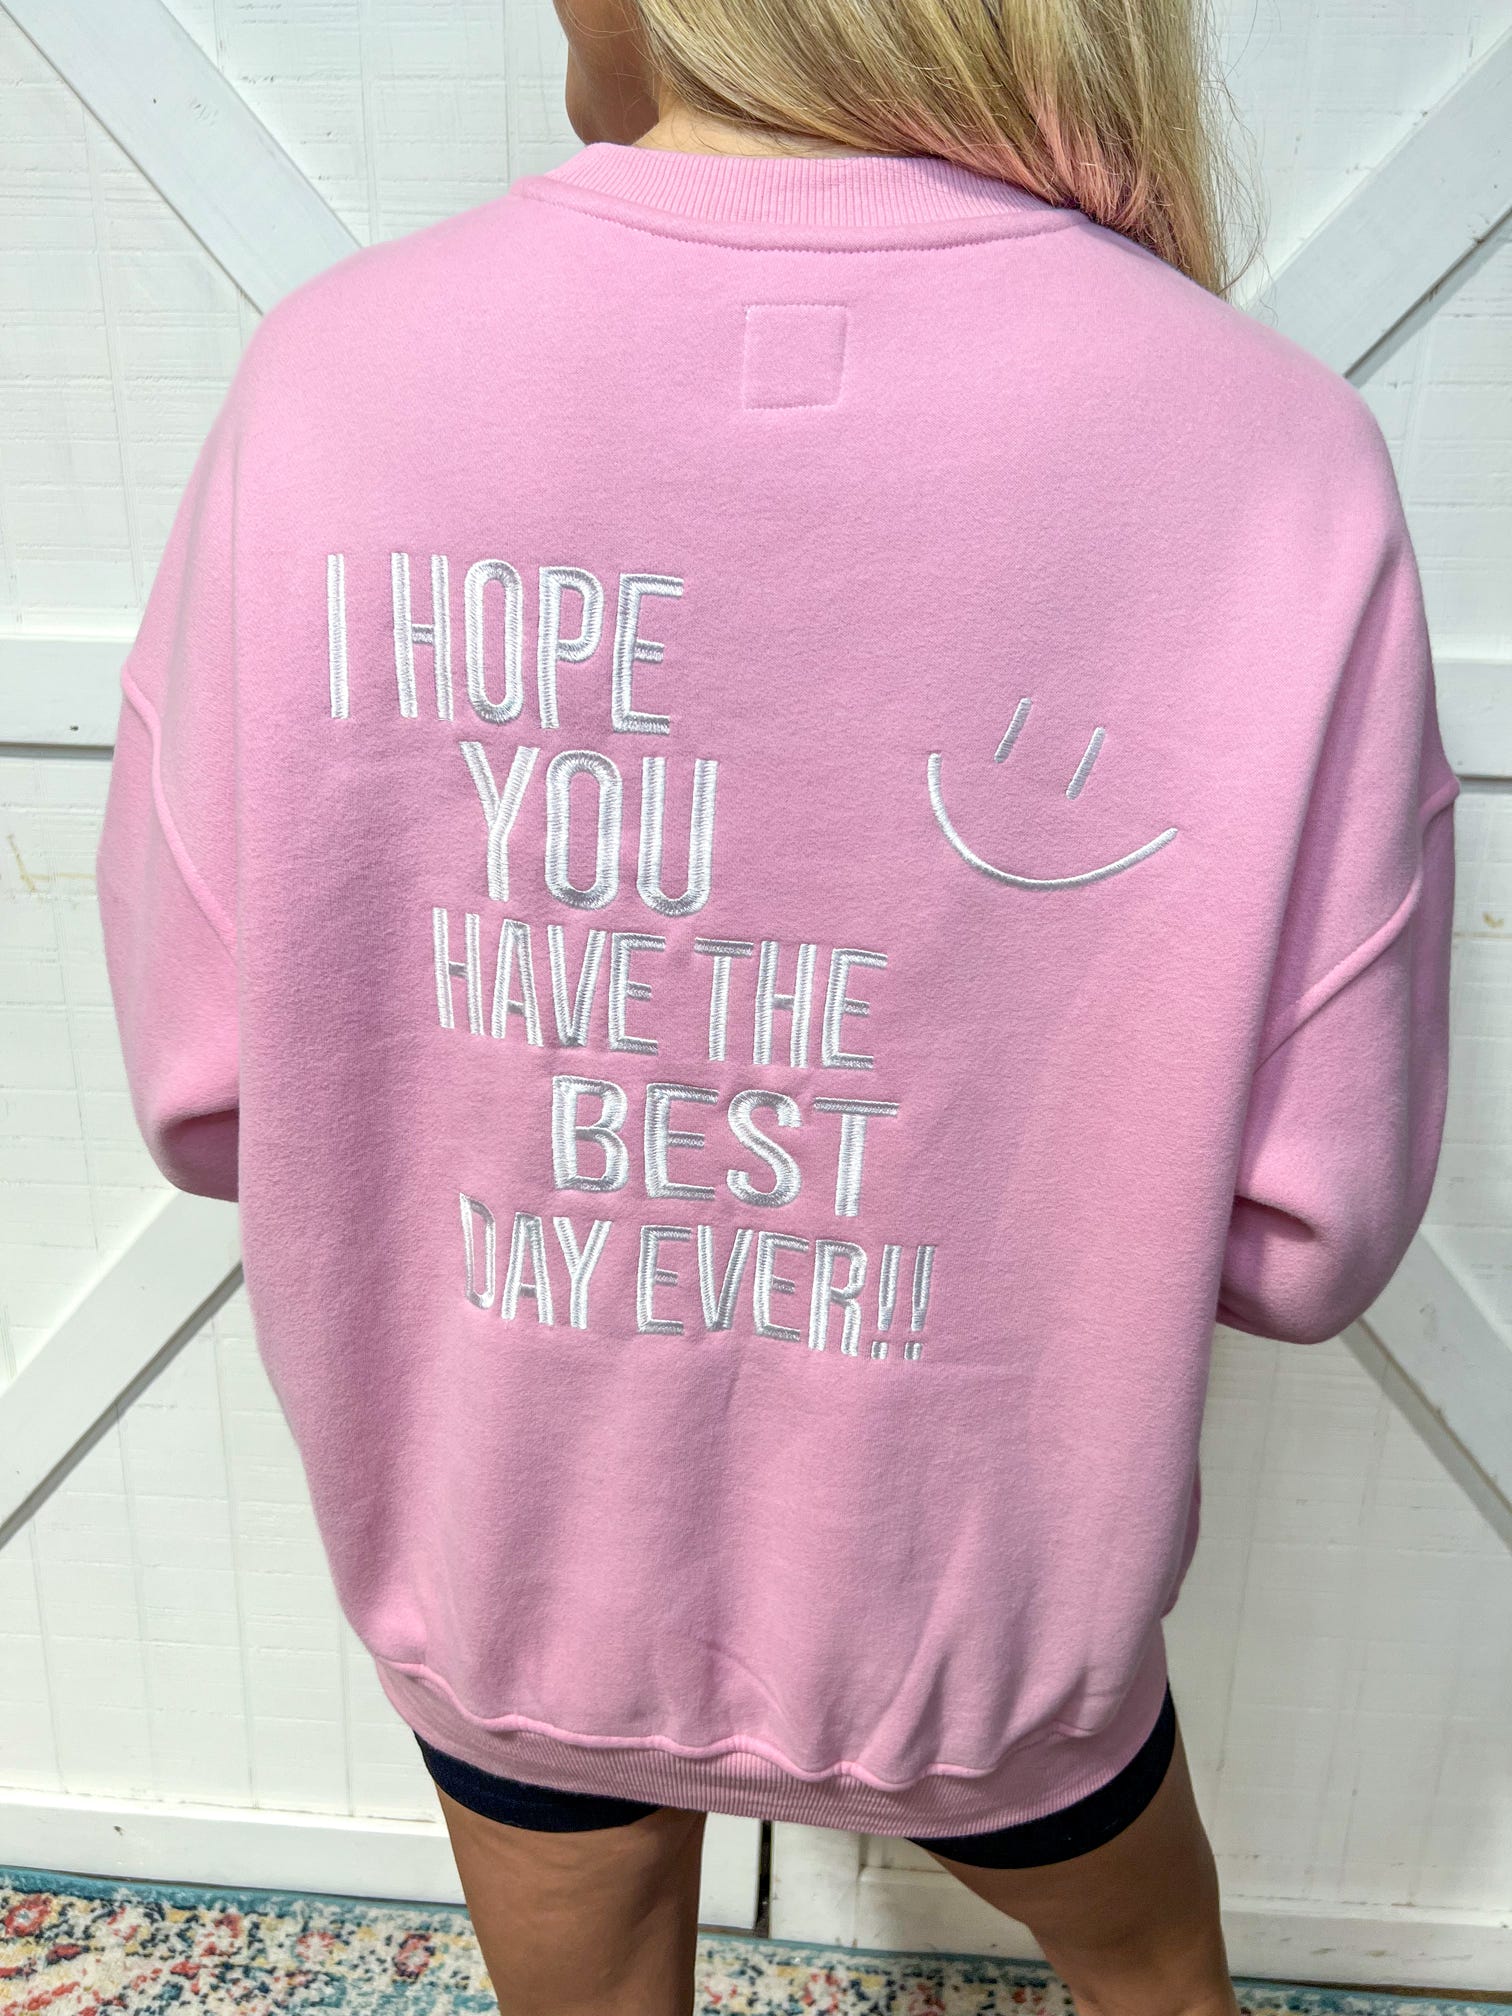 Up close photo of the back of the pink sweatshirt embroidered saying “I hope you have the best day ever” on the back along with another smiley face 